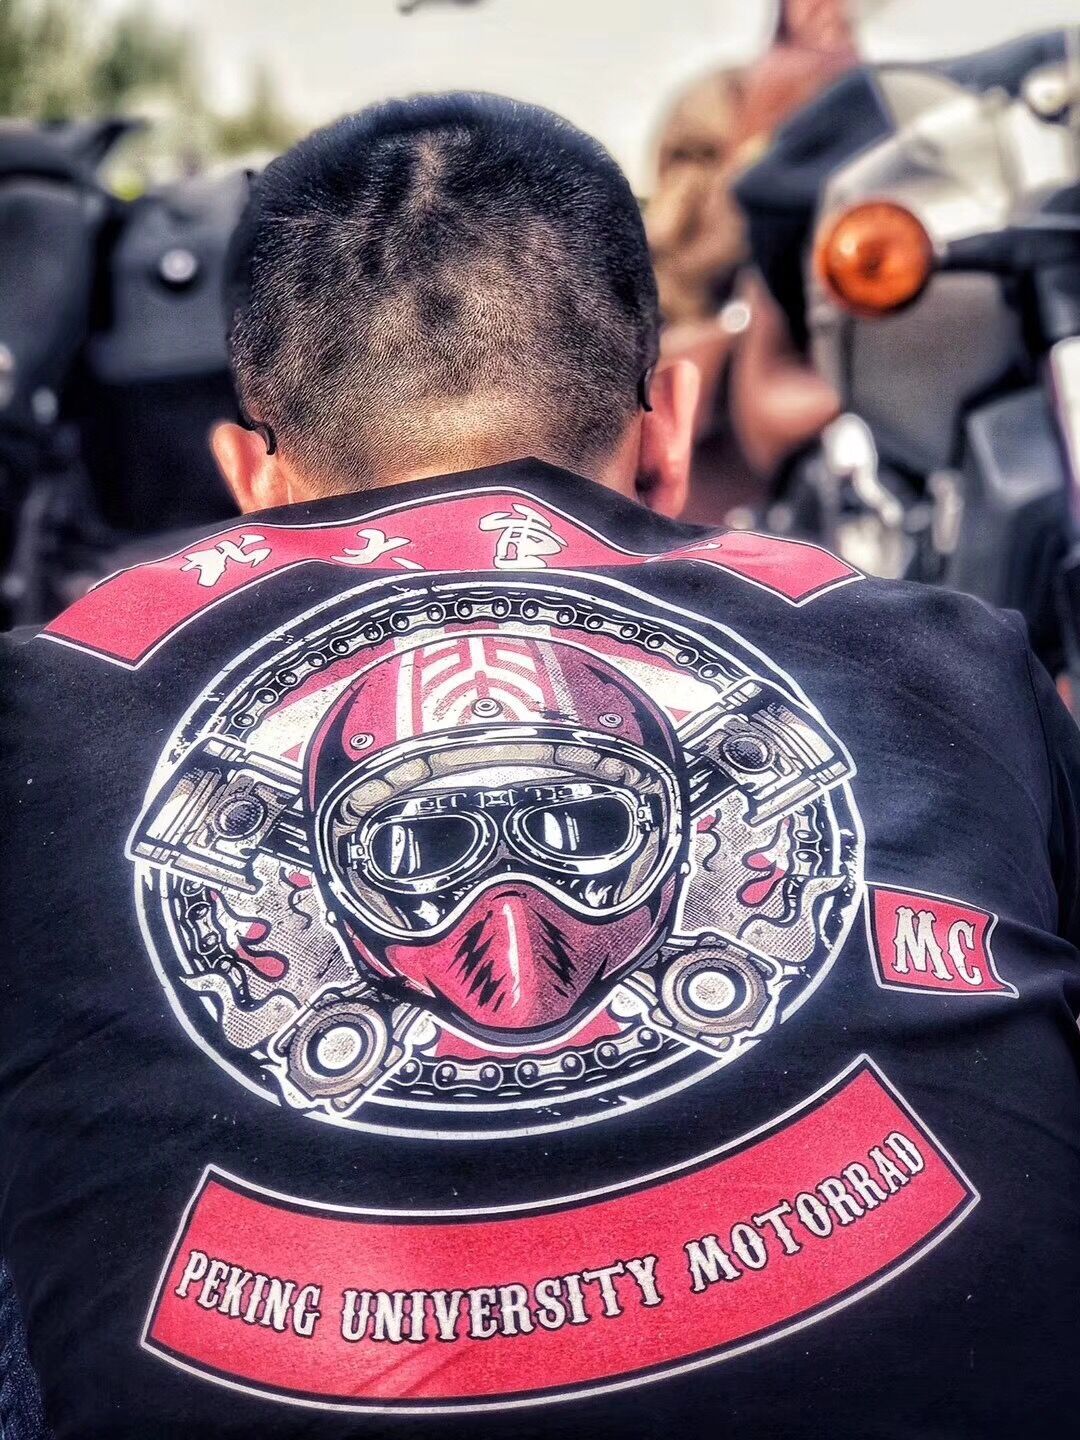 Surround Yourself with the Right People and Gear: The Power of Motorcycle Clubs